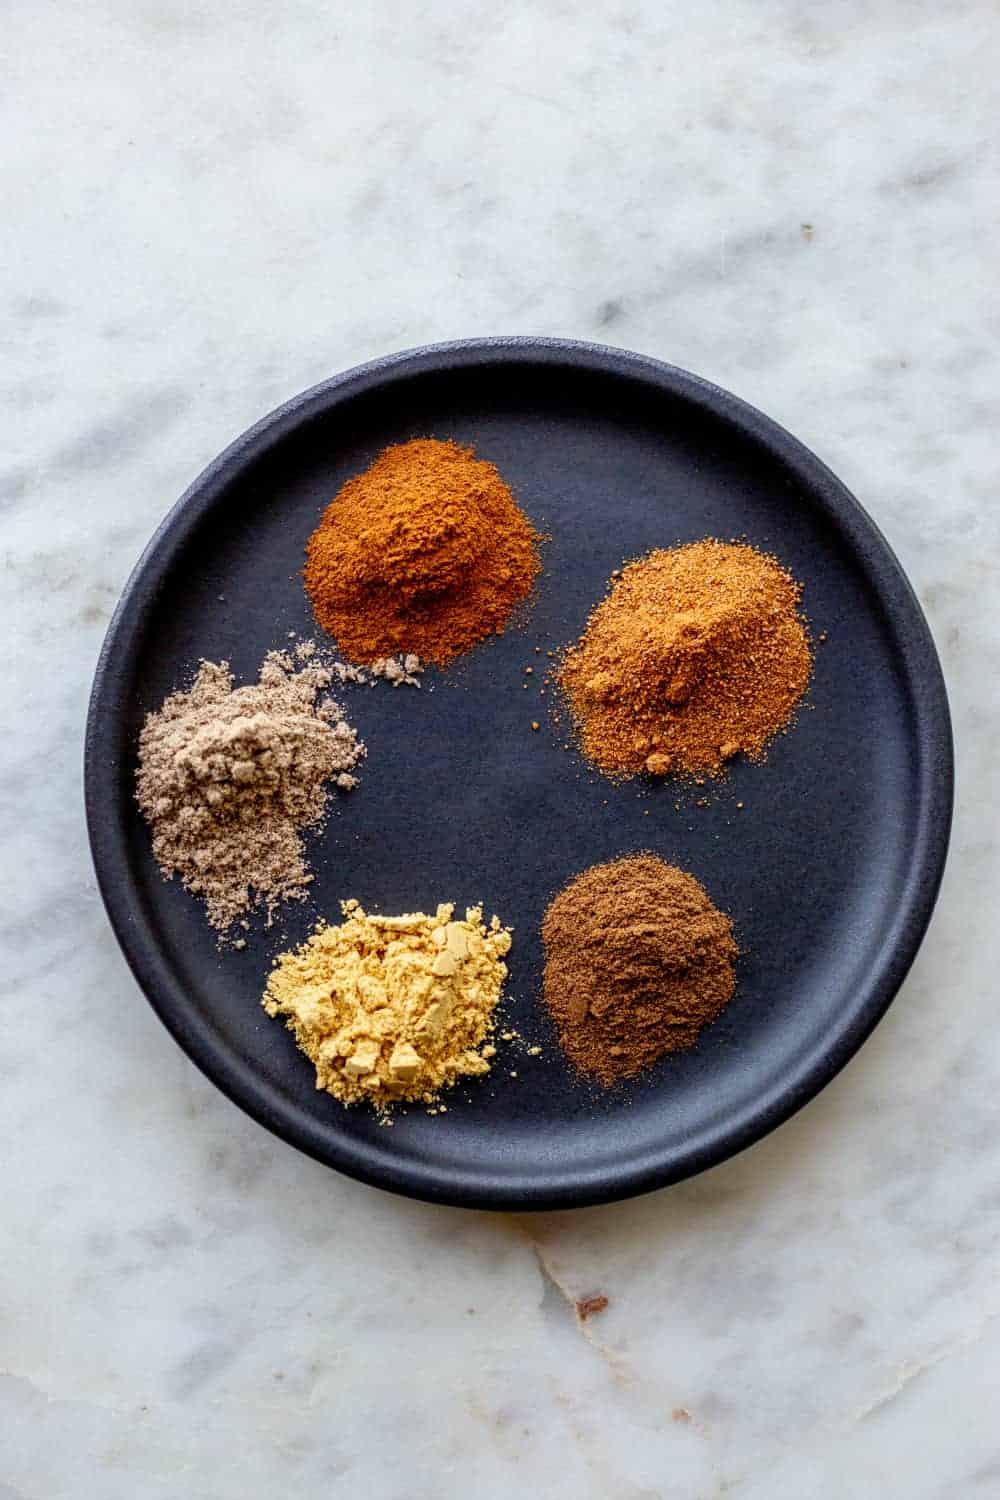 Spices for apple pie spice on a black plate